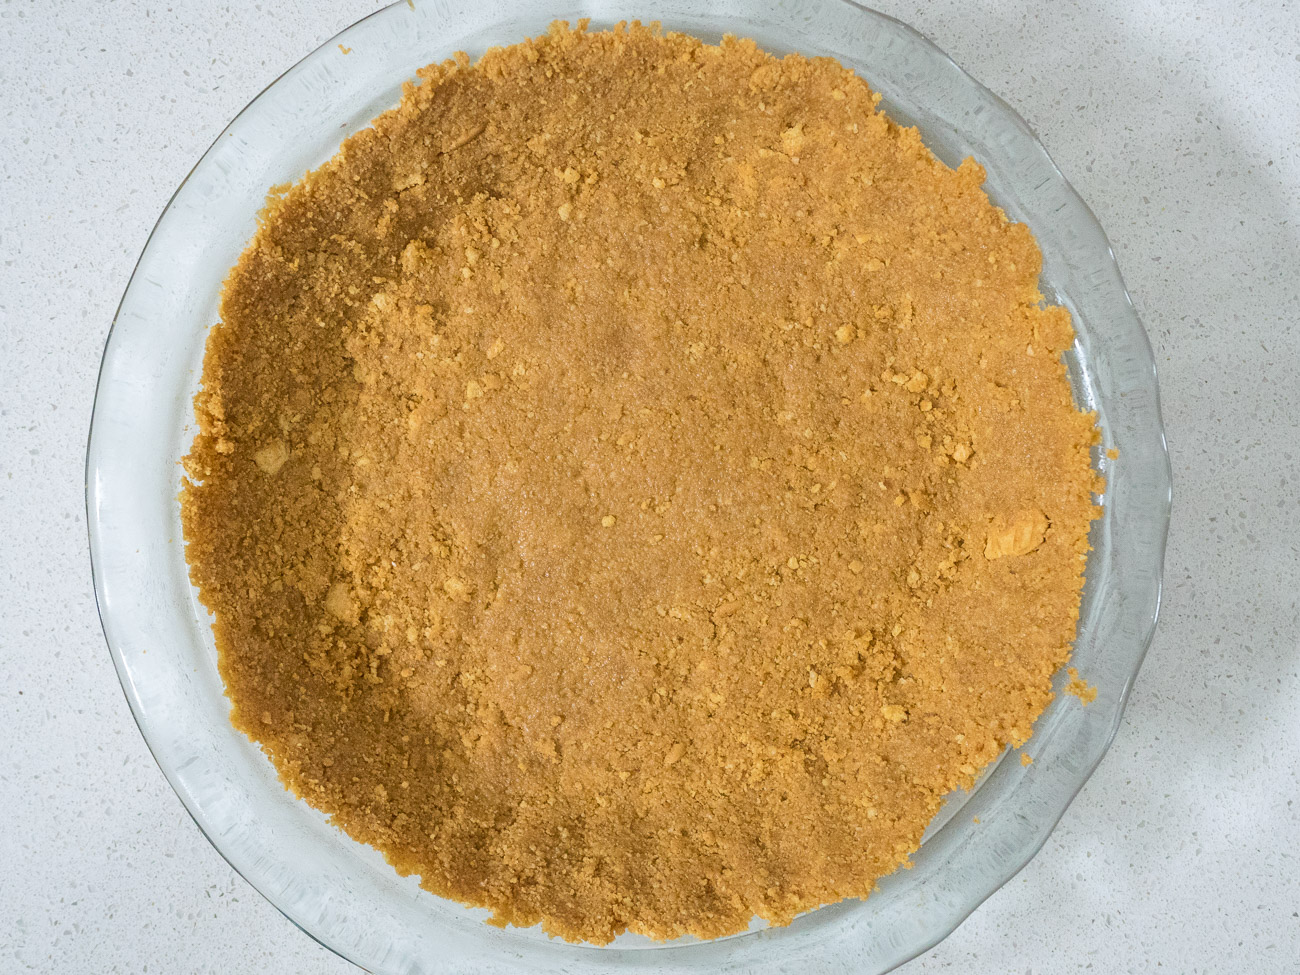 In a medium bowl majority of combine cookie crumbs with melted butter. Press into bottom and sides of greased 9-inch pie pan.